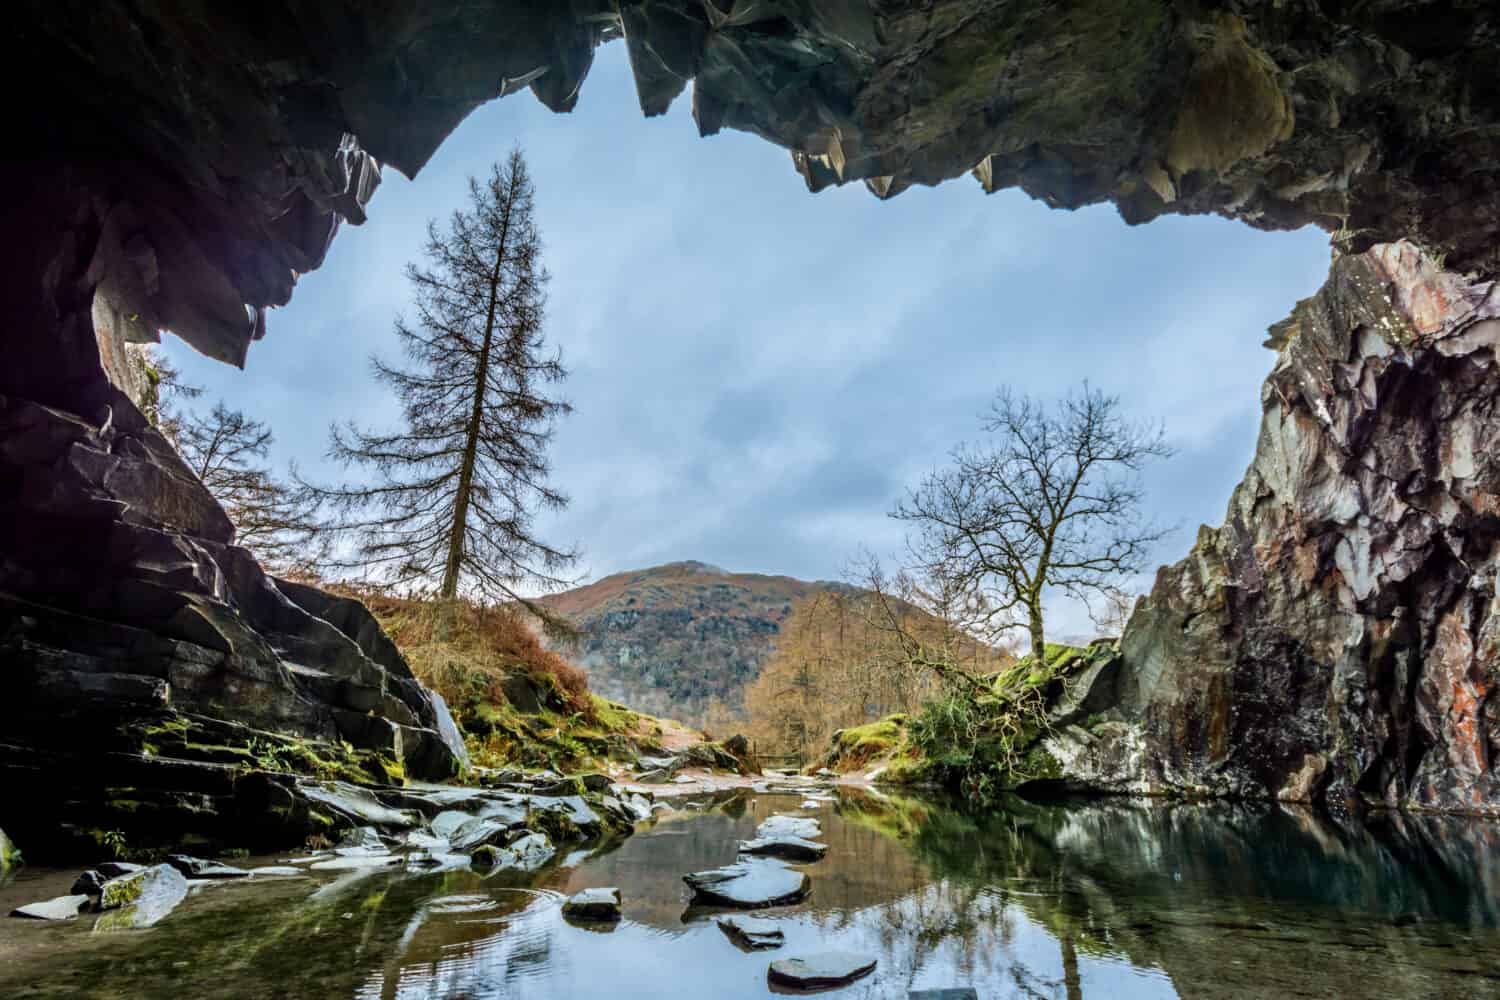 Rydal Cave, Rydal Water, Lake District UK